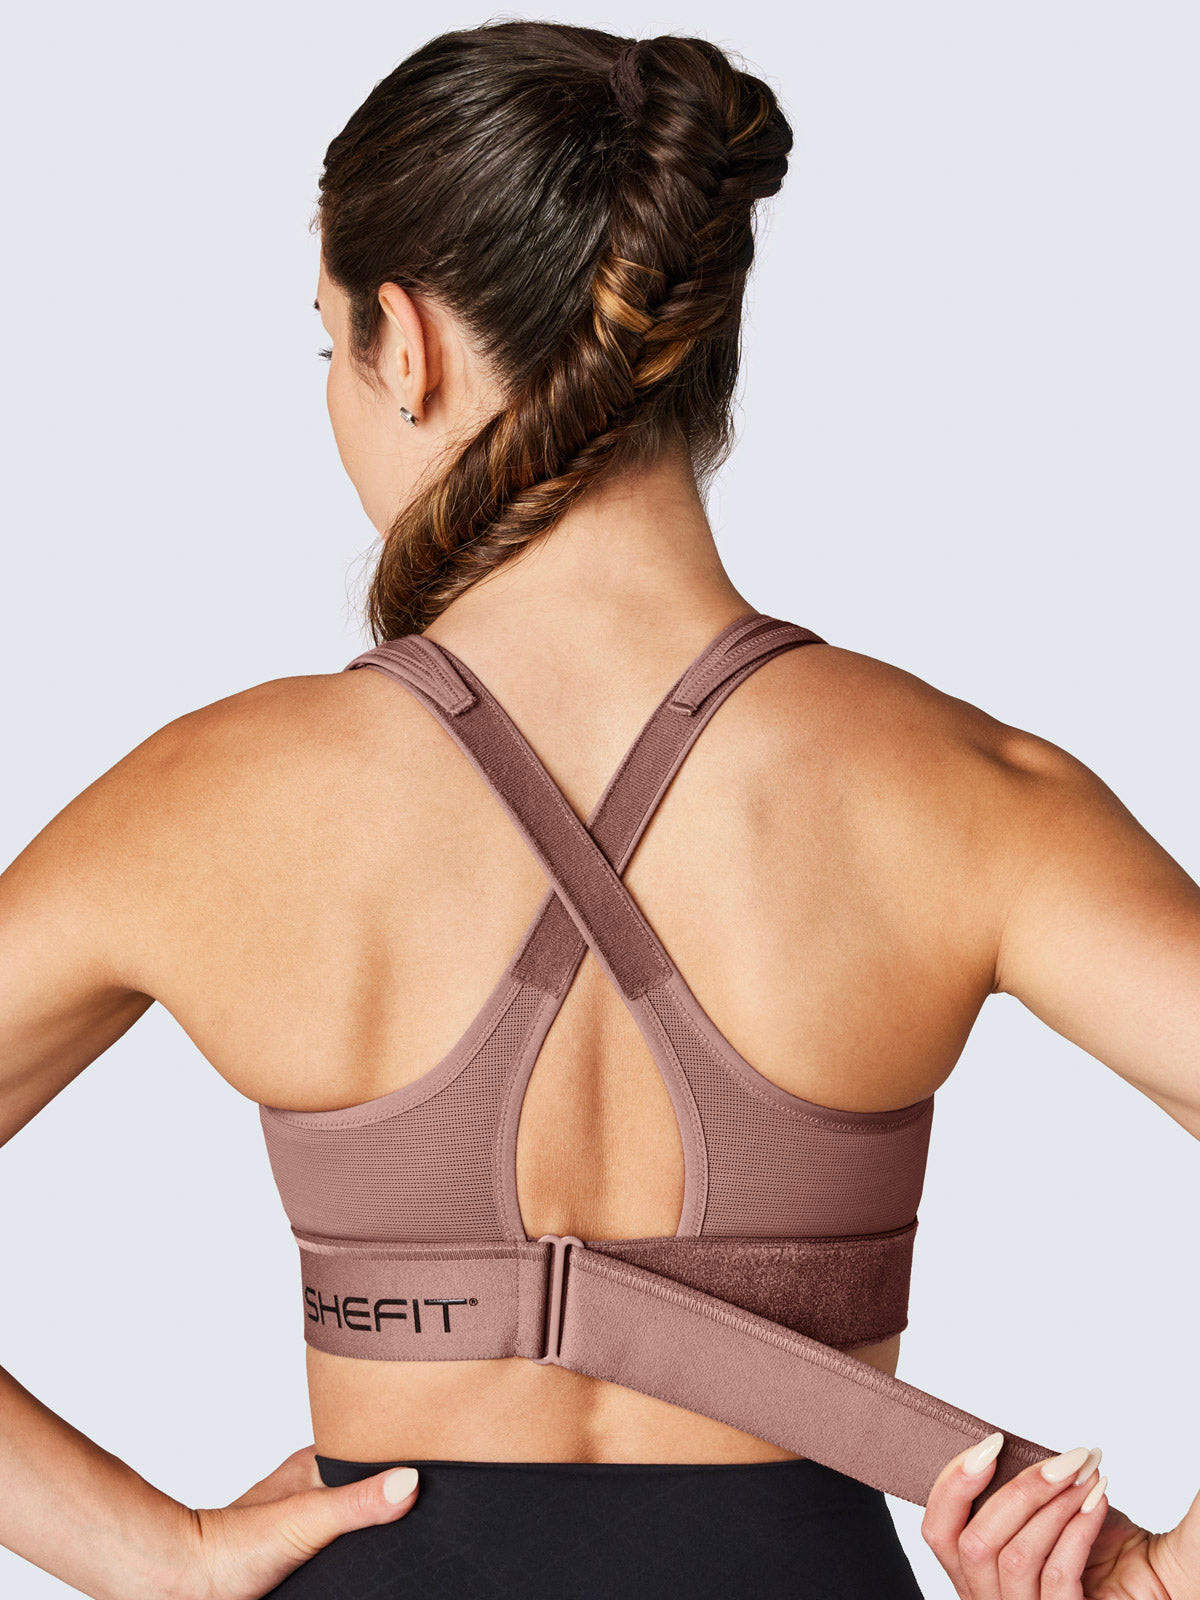 Shefit Ultimate Sports Bra, Just Zip, Cinch and Lift. The Shefit Ultimate Sports  Bra is an adjustable, high-impact sports bra that provides the perfect  comfort and support for any